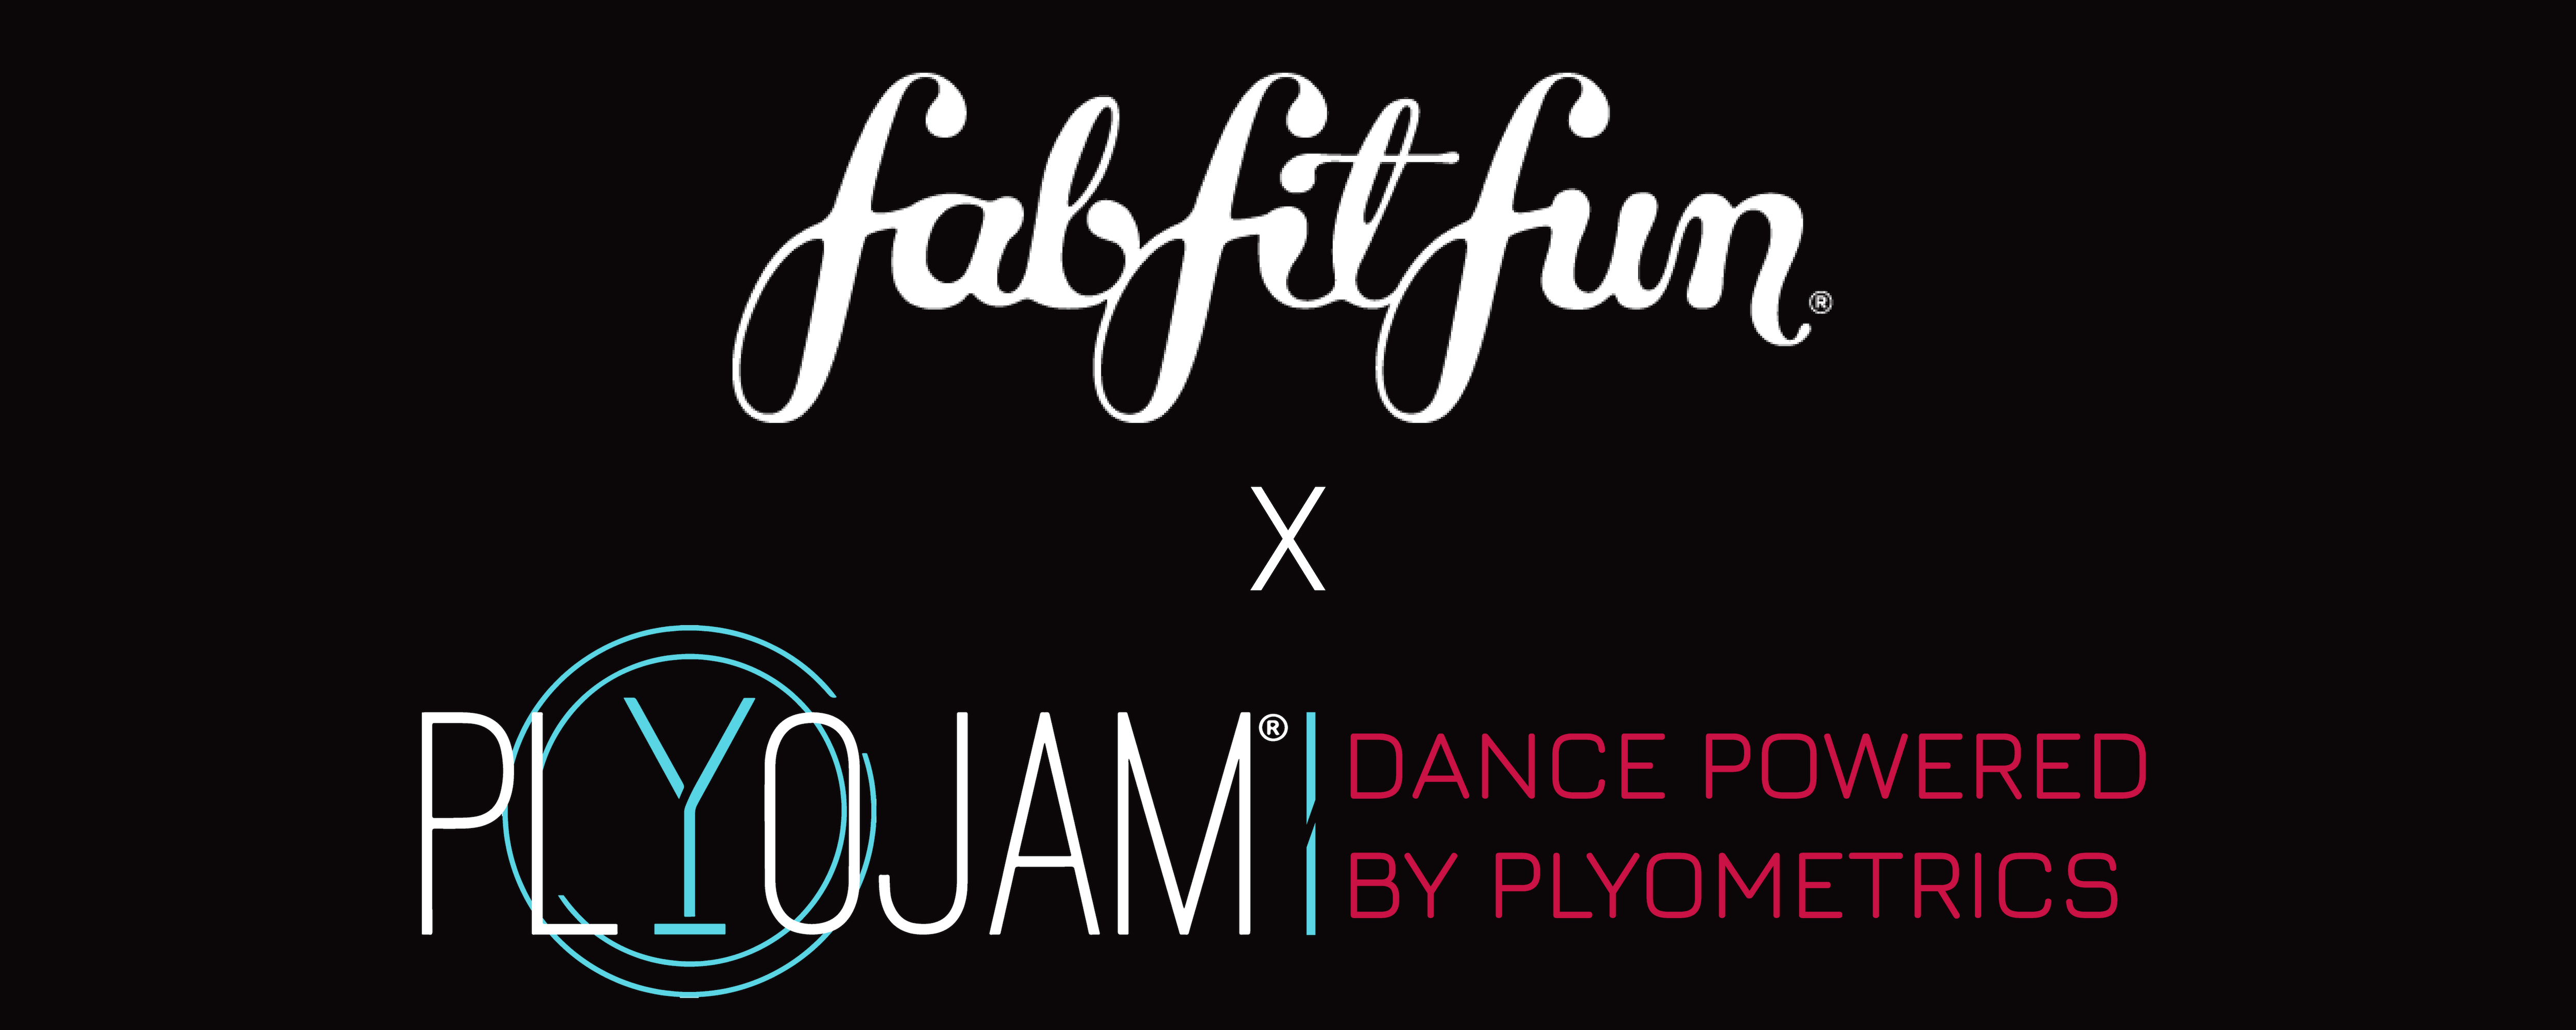 FabFitFun Members can enjoy an entire year of PlyoJam Dance Fitness classes for 50% off